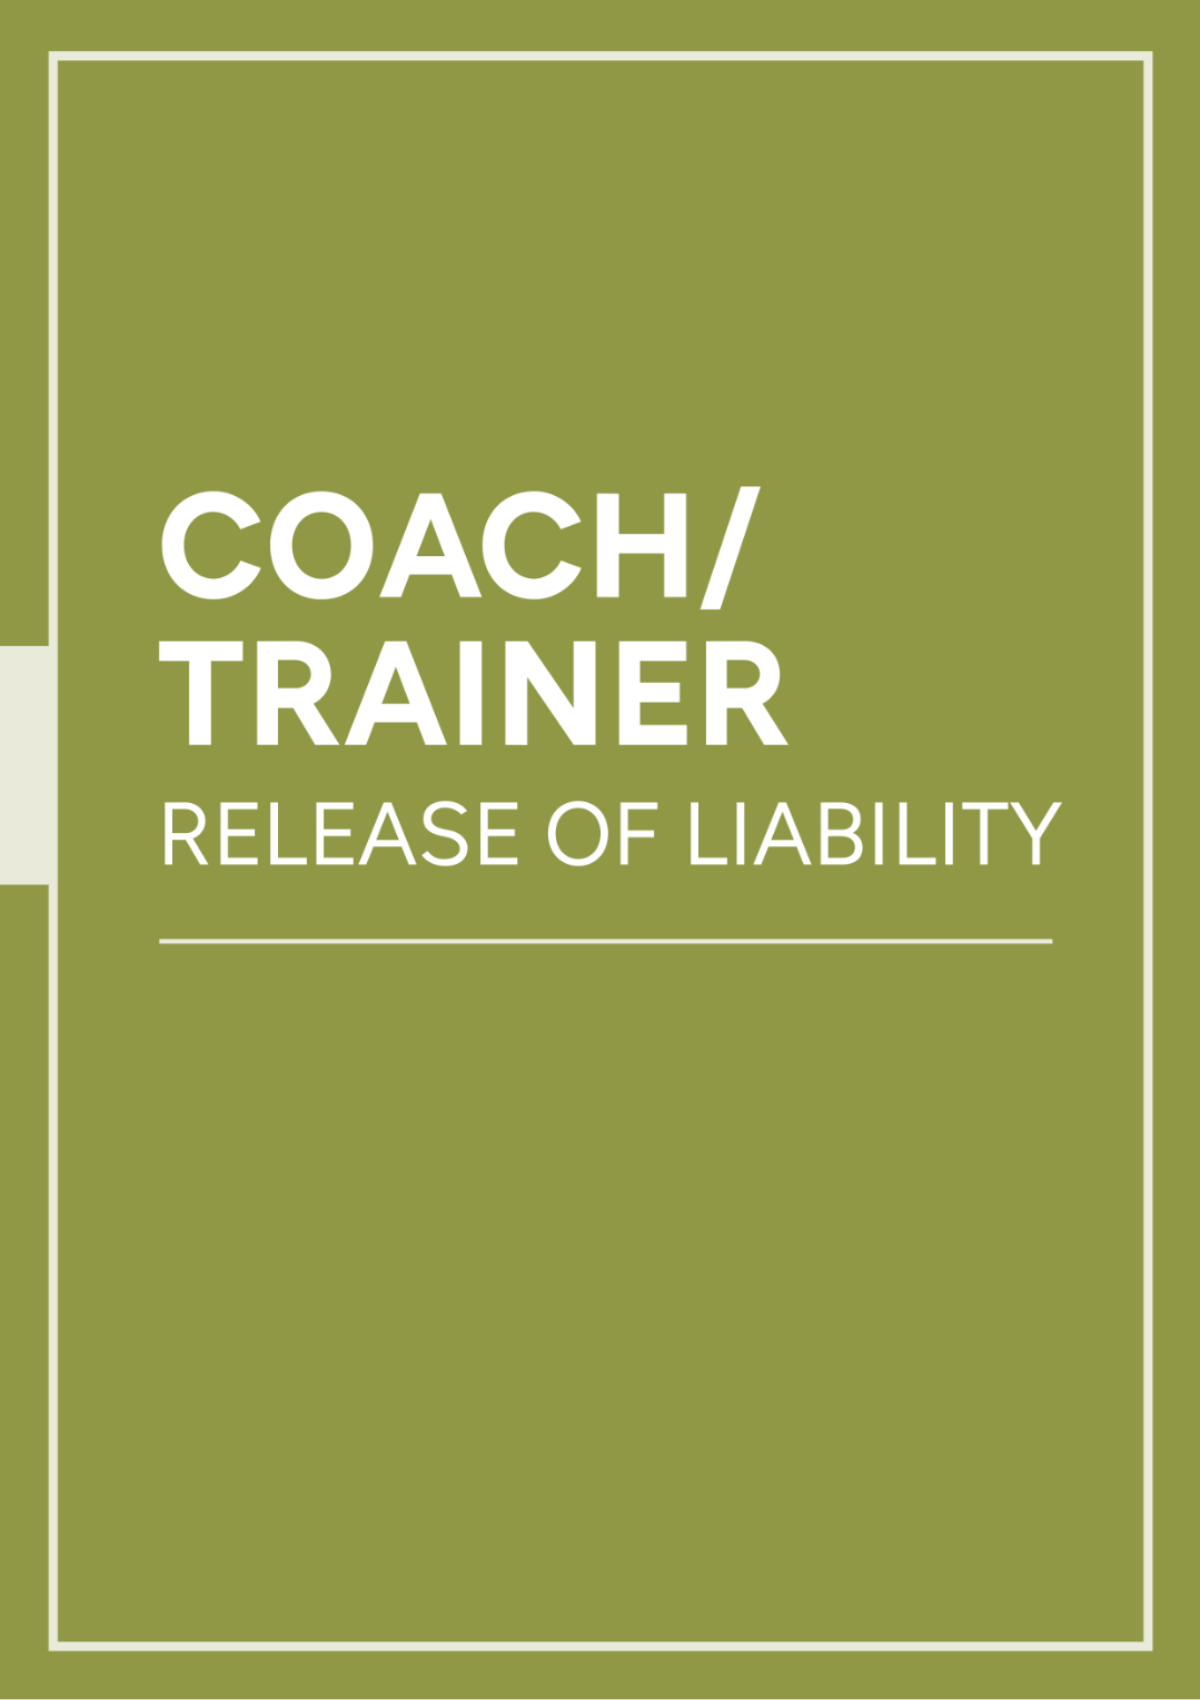 Coach/Trainer Release Of Liability Template